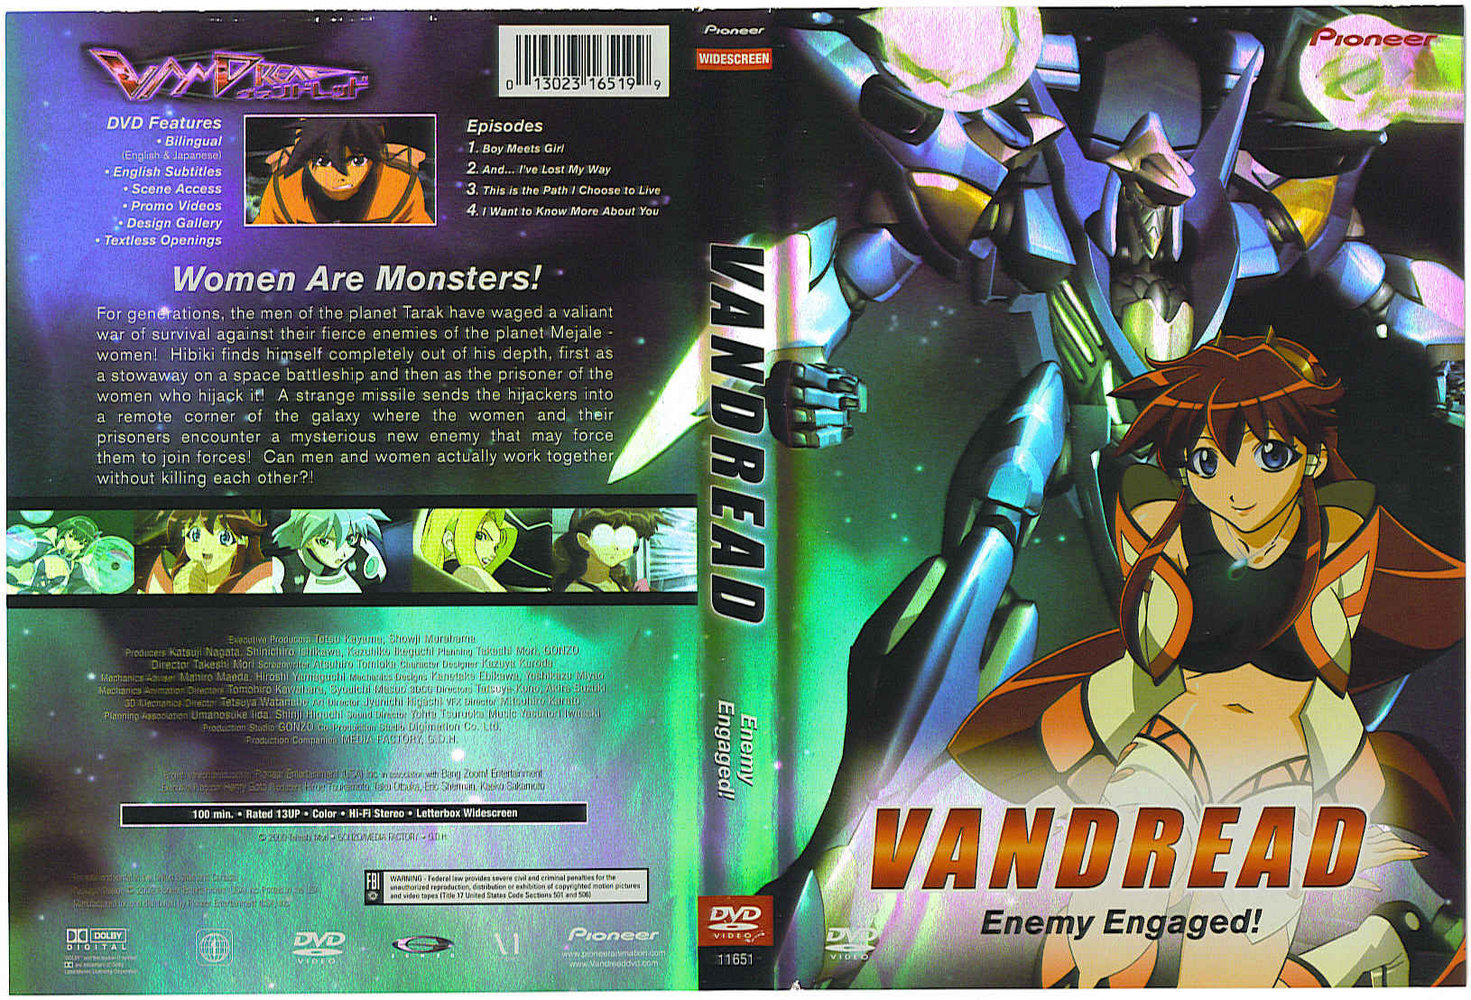 Jaquette DVD Vandread Enemy Engaged Zone 1